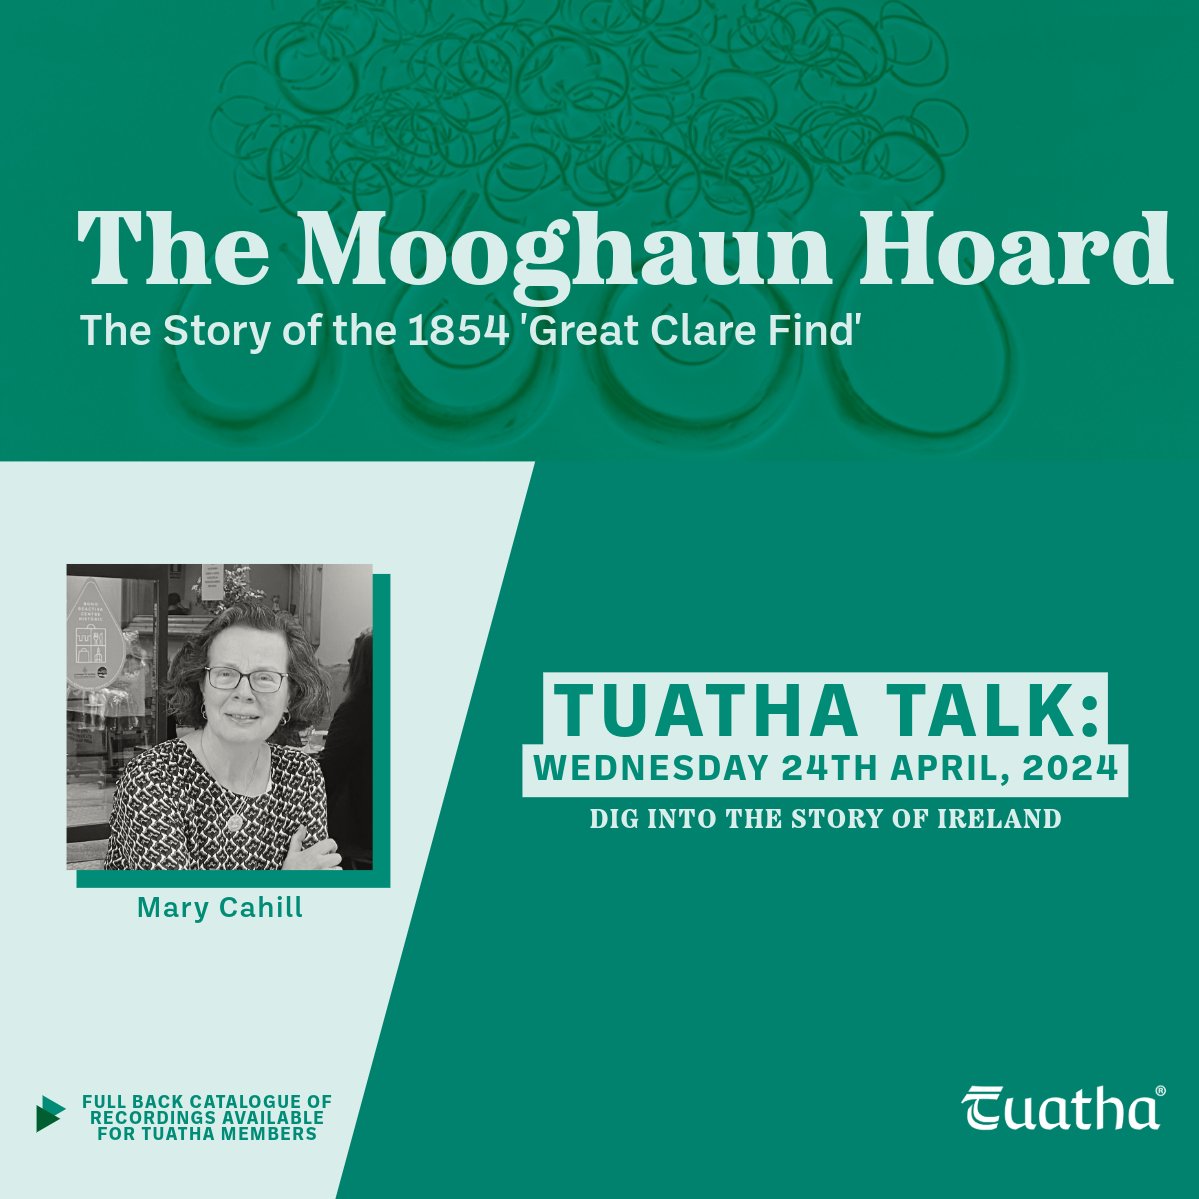 The latest webinar in our #TuathaTalk series is about to begin! This event was the fastest selling out webinar in our series, and I know we are all very excited to welcome @au_ireland to hear her speak on the discovery of the Mooghaun Hoard.